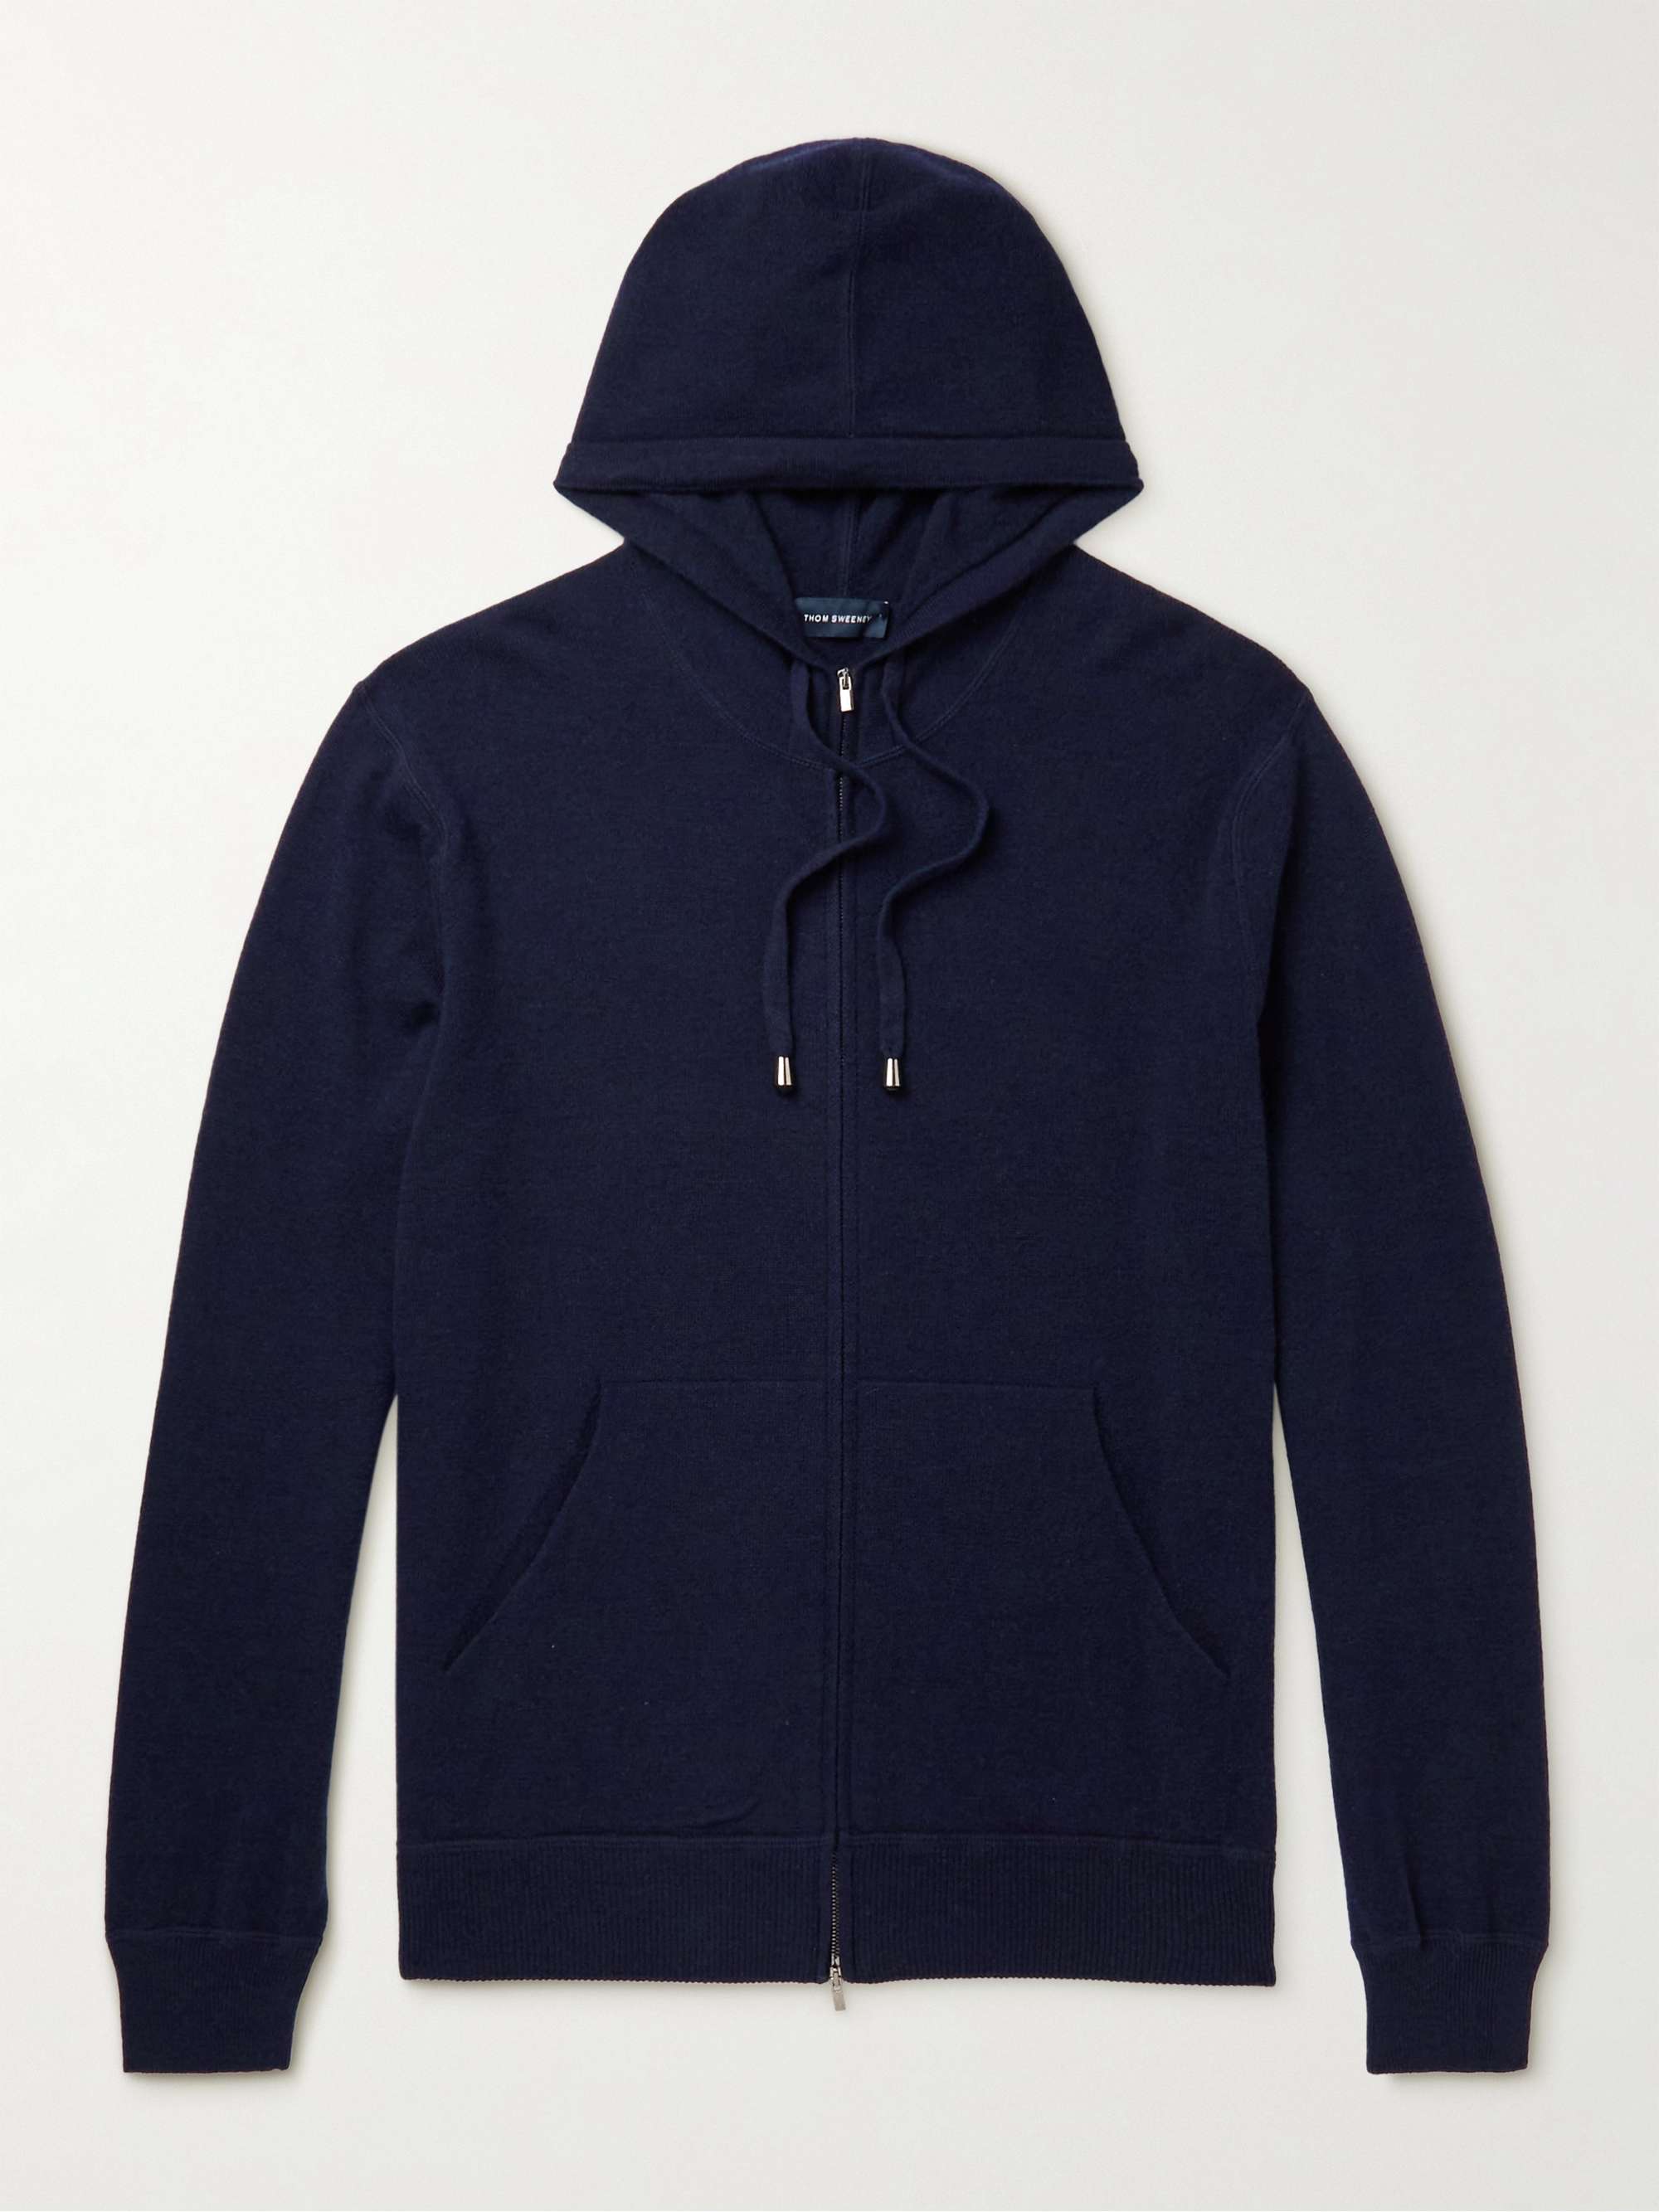 THOM SWEENEY Wool and Cashmere-Blend Zip-Up Hoodie